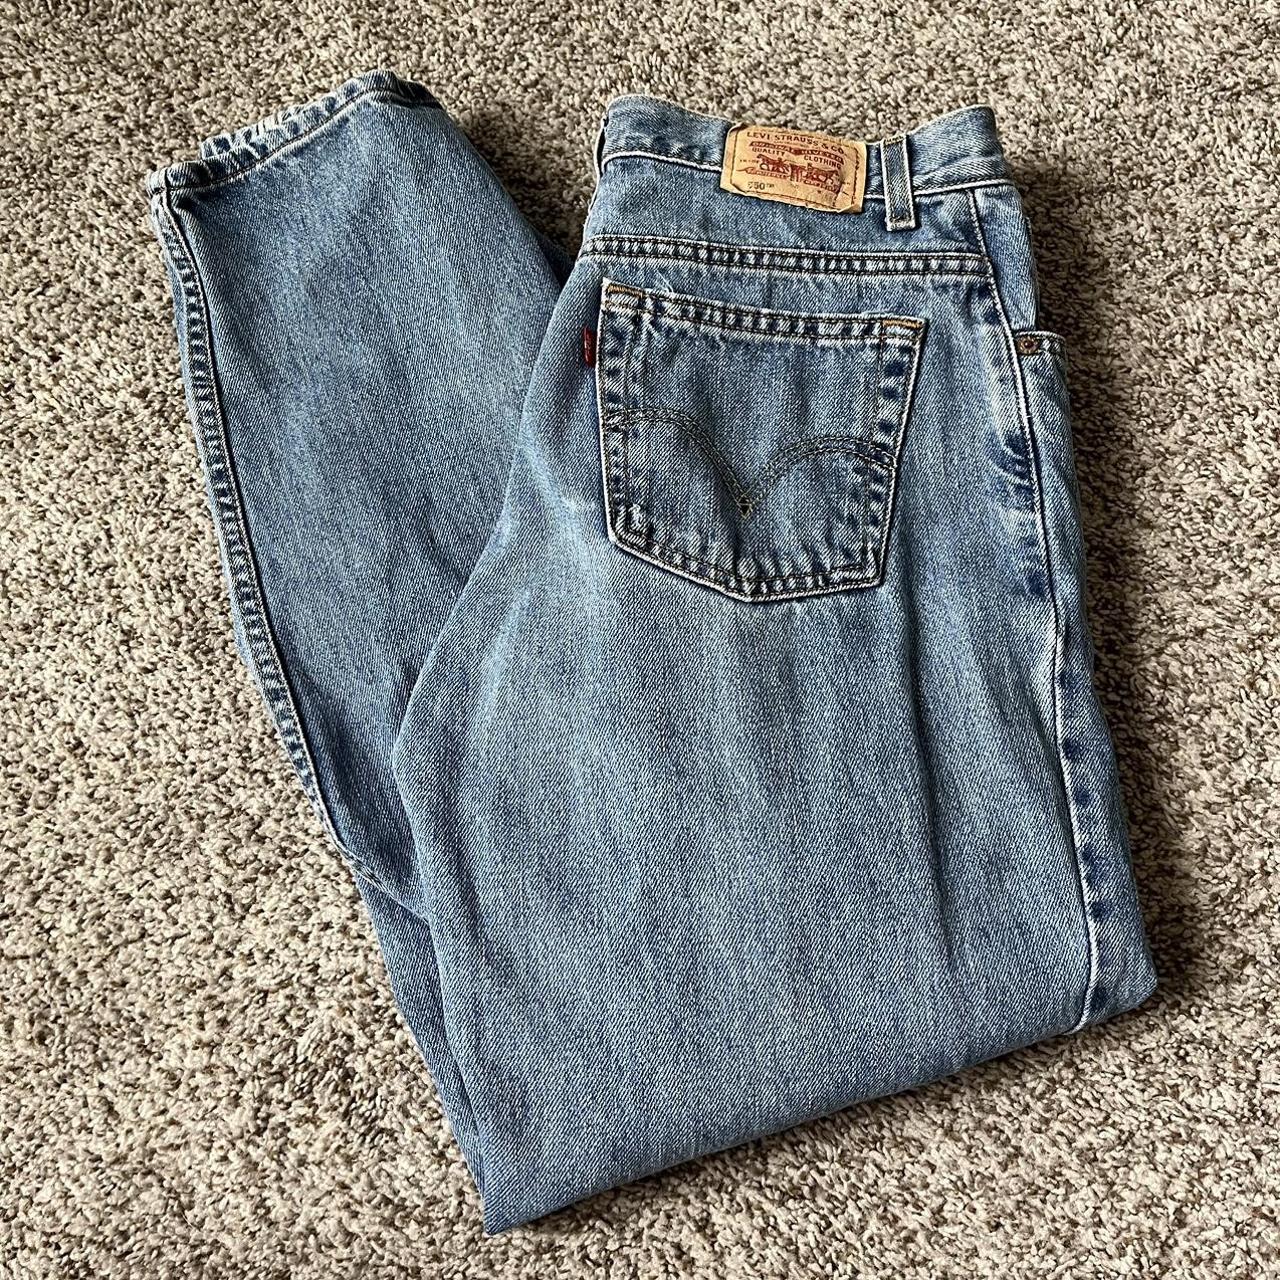 Levi’s 550 Blue Jeans Classic Relaxed Great... - Depop